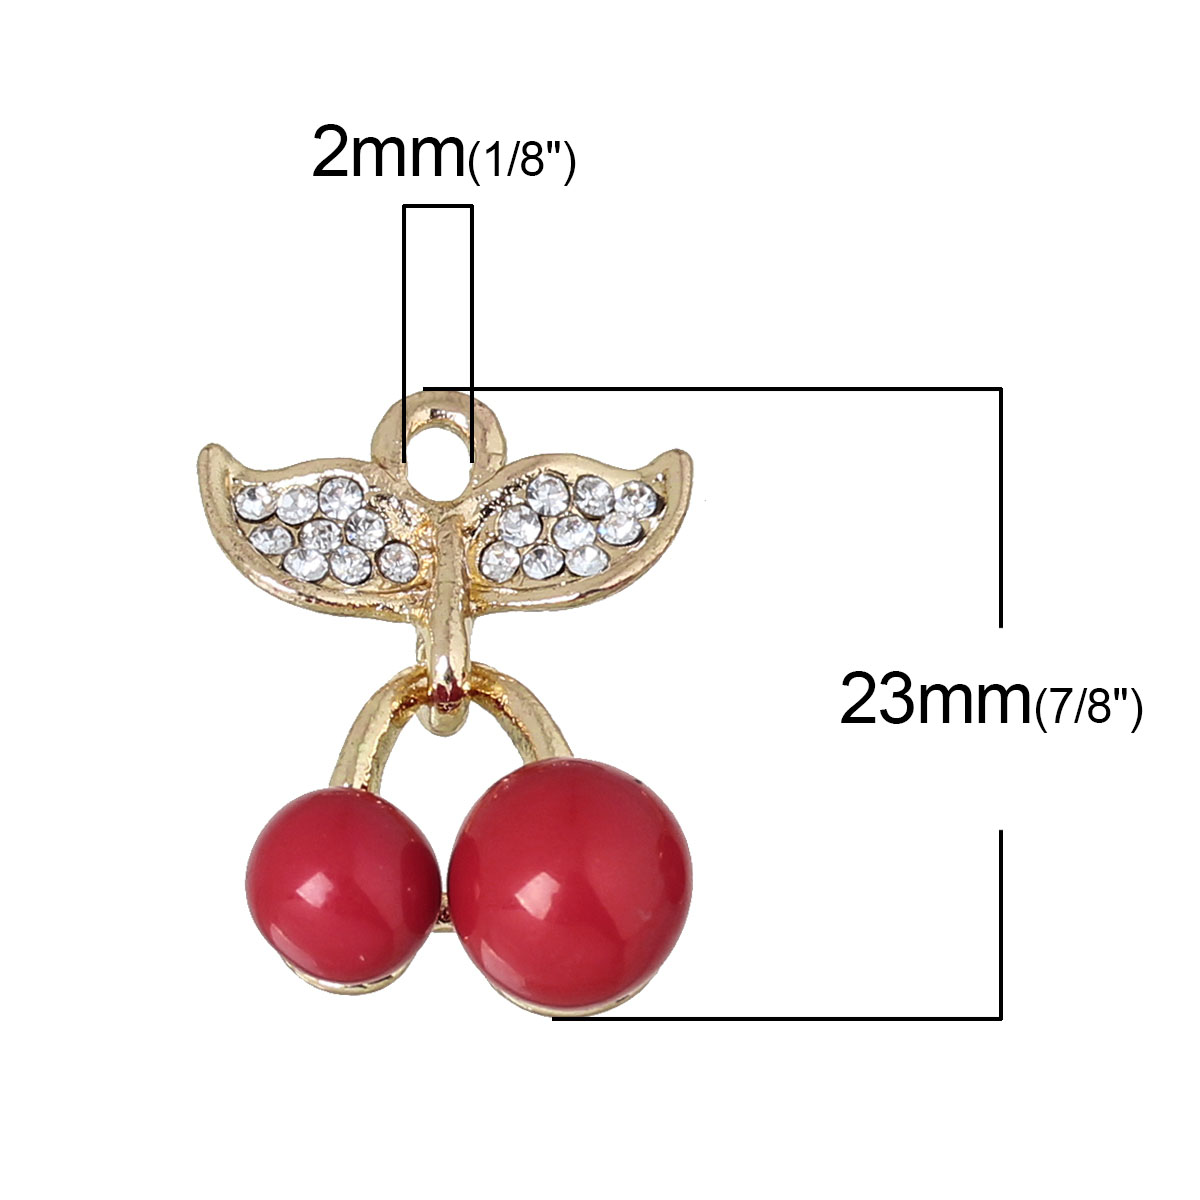 Picture of Zinc Based Alloy Charms Cherry Fruit Light Golden Red Clear Rhinestone 23mm( 7/8") x 15mm( 5/8"), 5 PCs